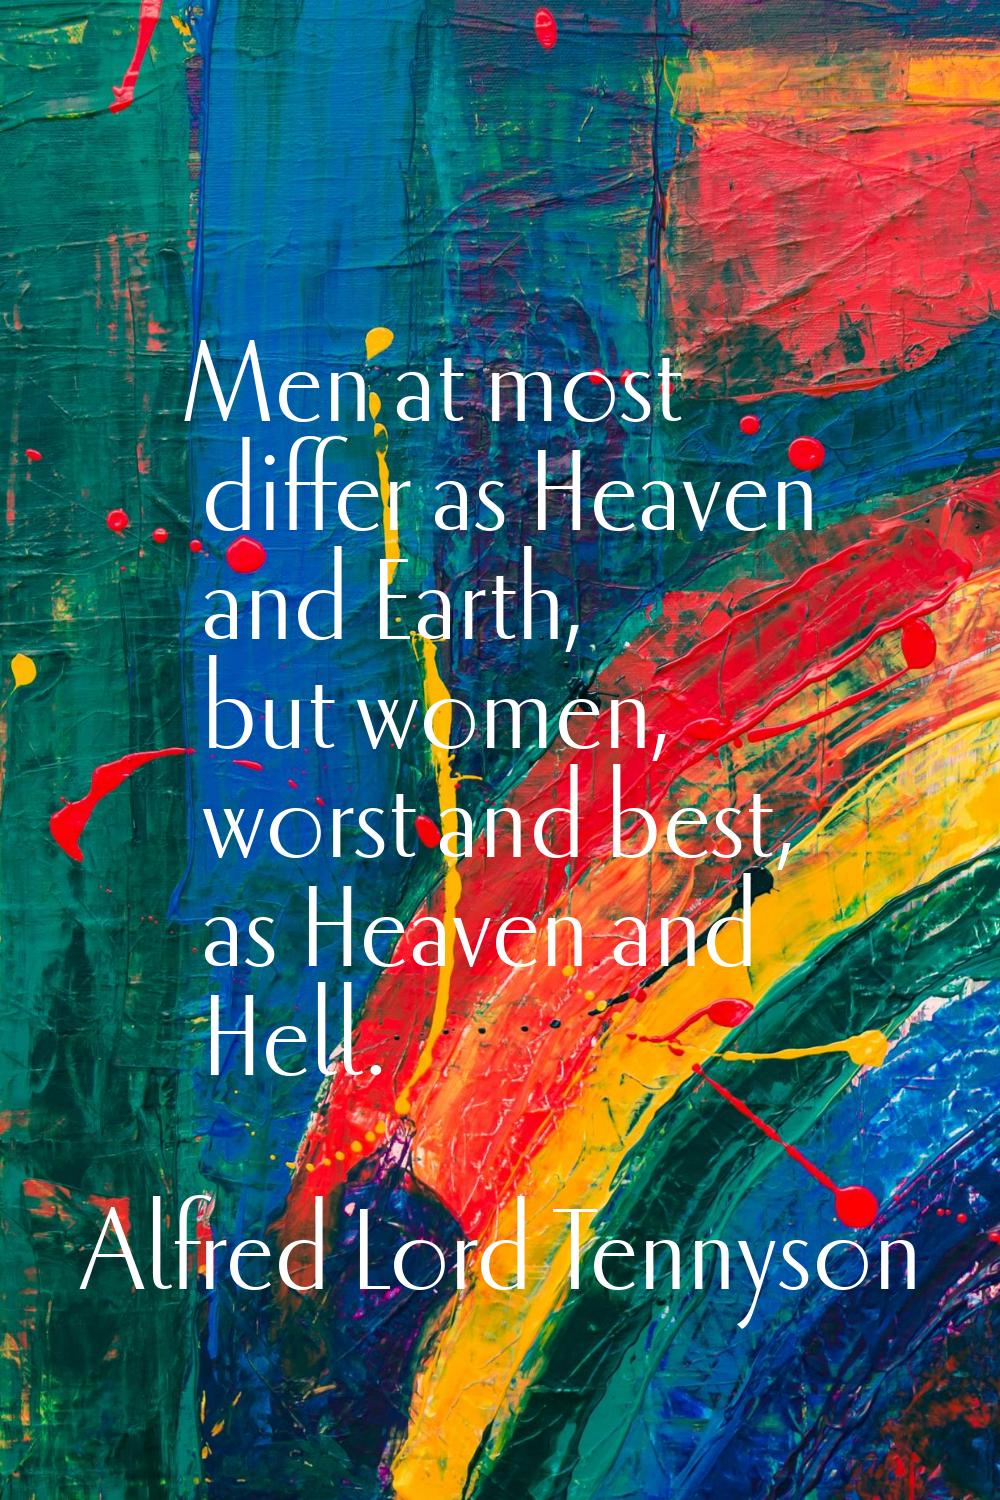 Men at most differ as Heaven and Earth, but women, worst and best, as Heaven and Hell.